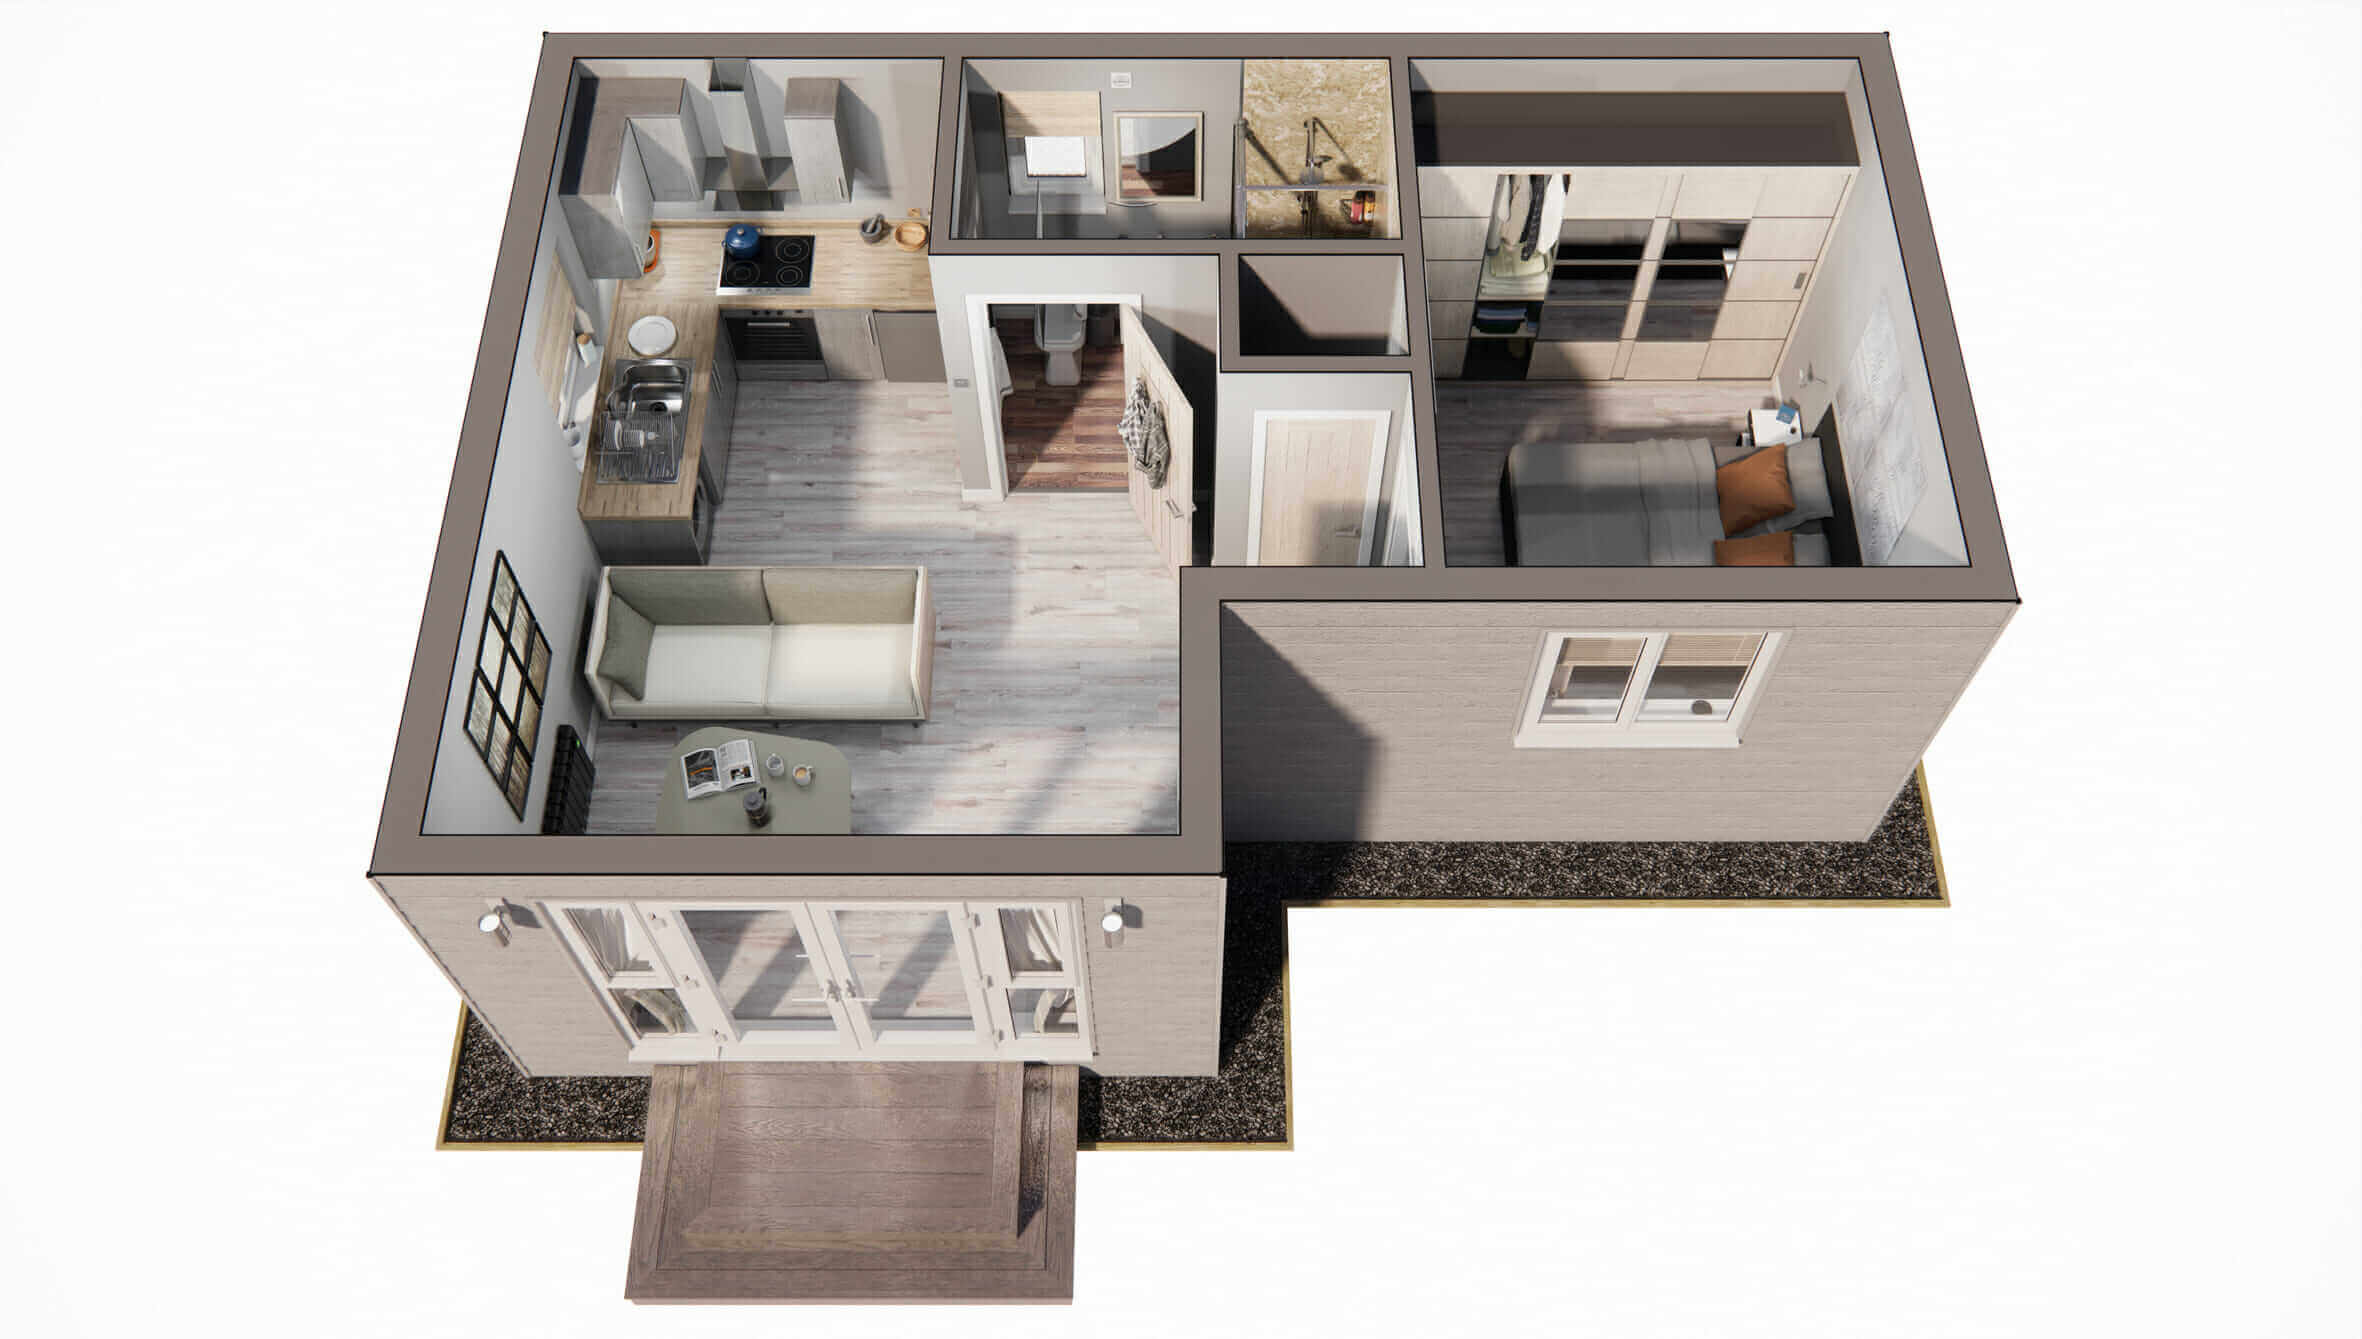 image shows a granny annexe layout from iHUS